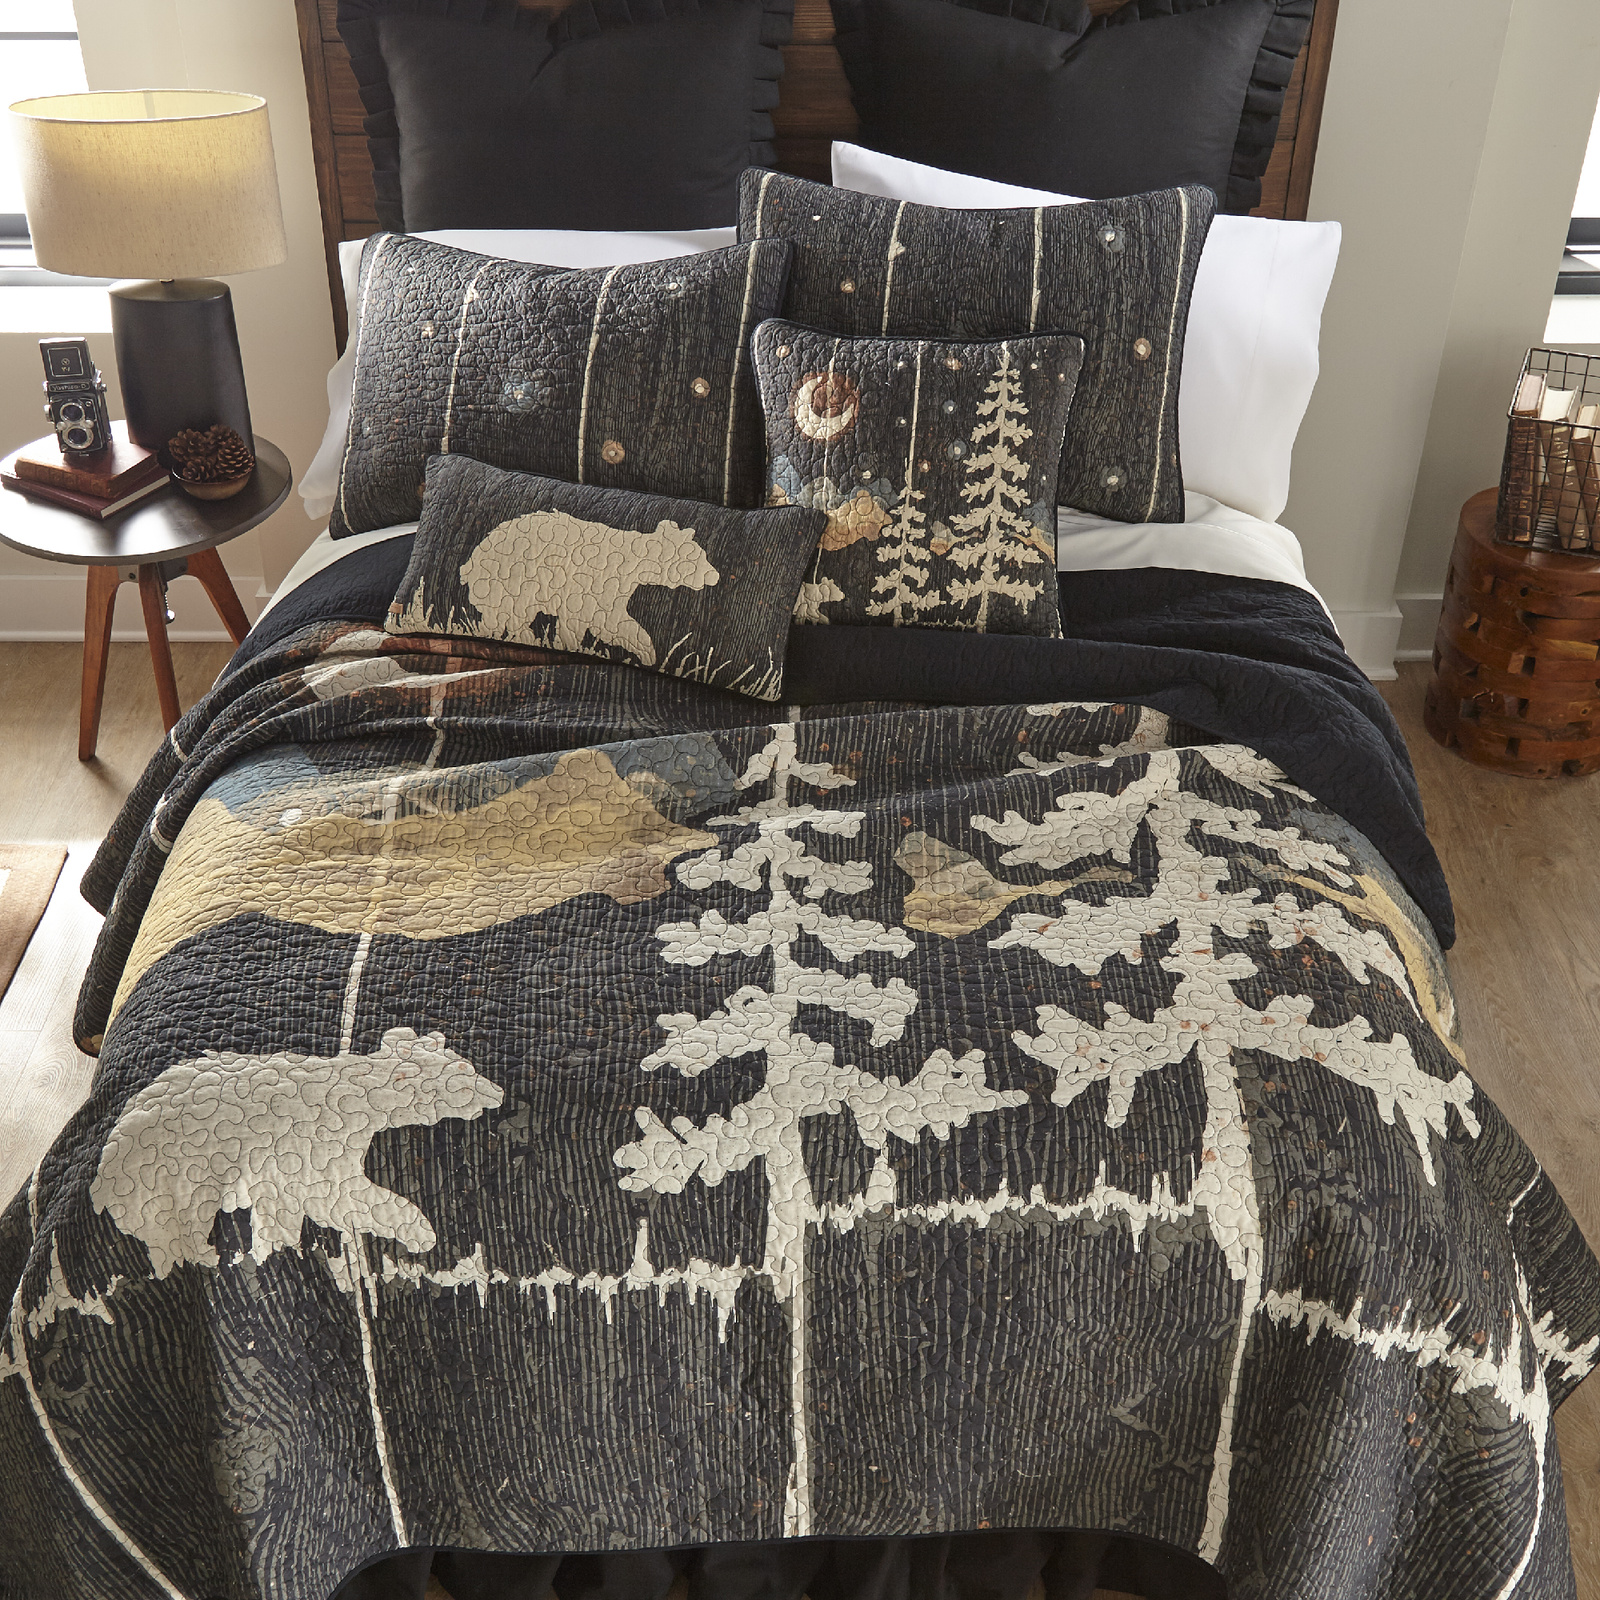 Moonlit Bear Twin Cotton Quilt by Donna Sharp - Lodge Quilt with Bear Pattern - Twin - Machine Washable - image 1 of 4